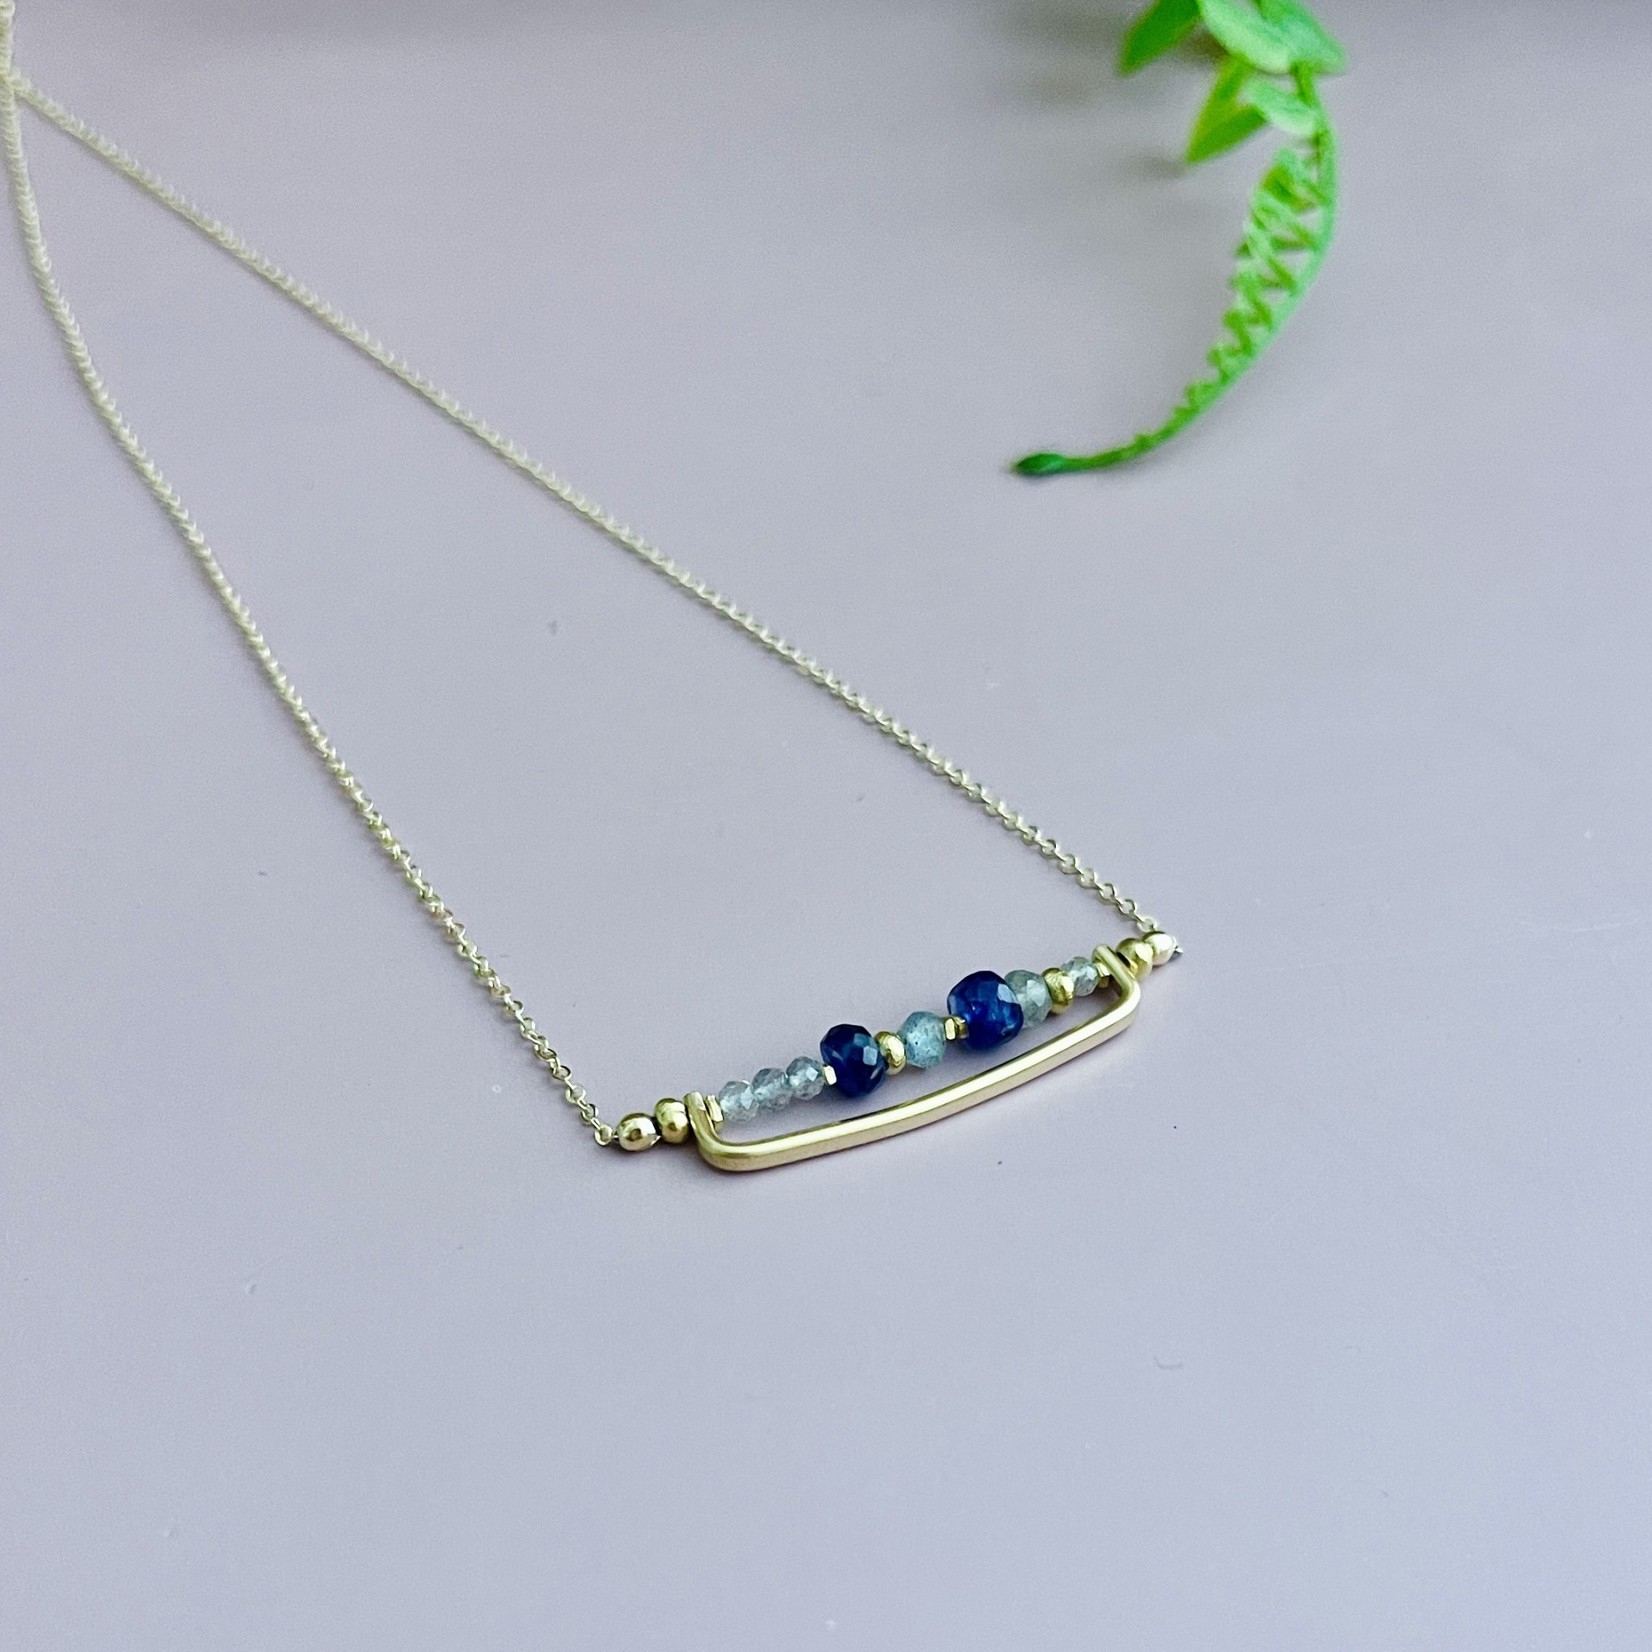 J&I Handmade 14k gold filled bar with faceted blue sapphire and labradorite necklace. 16" L